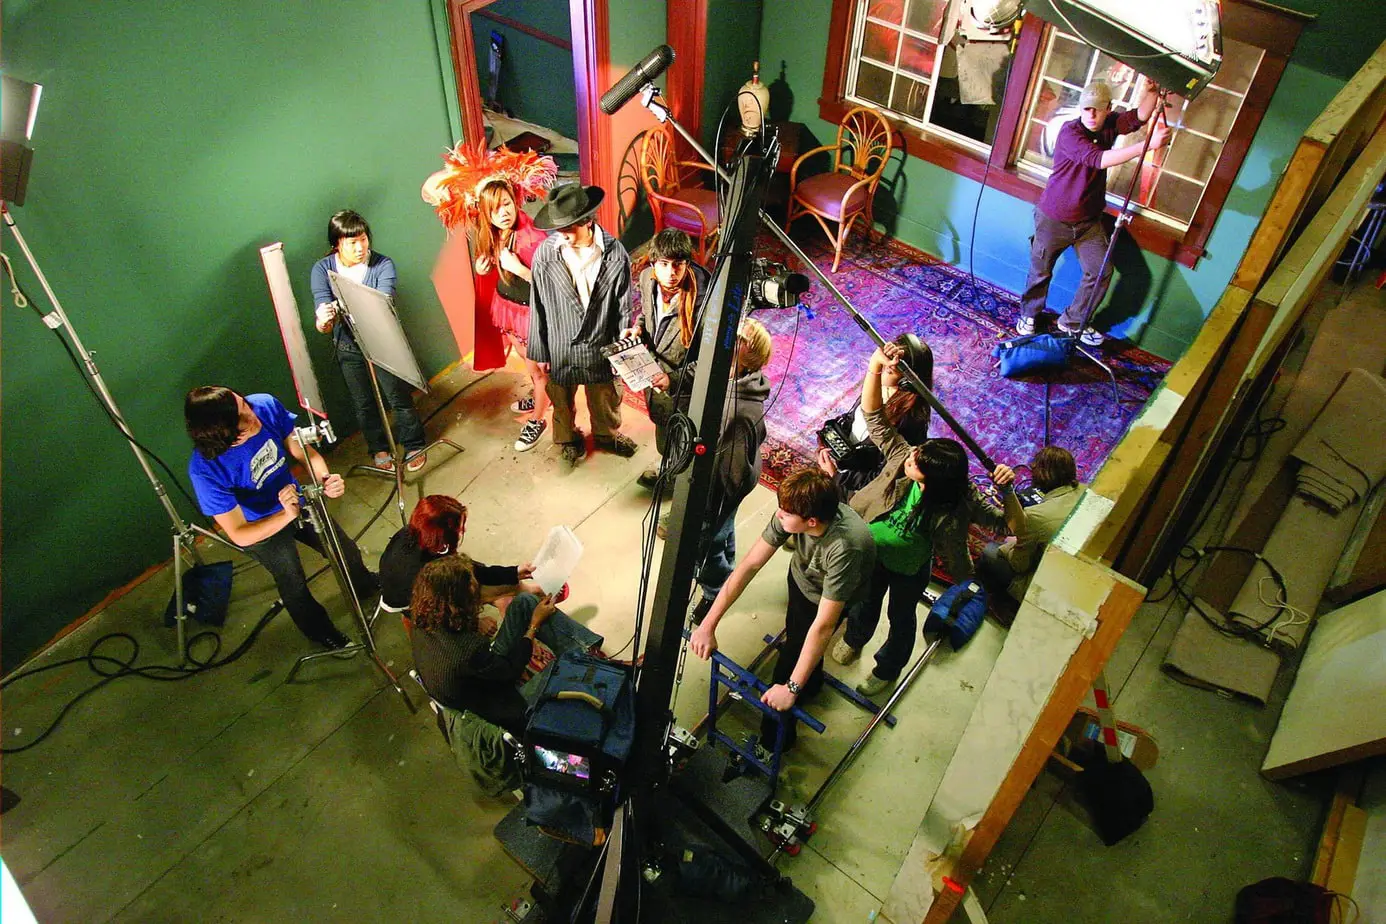 production crew in a shooting scene